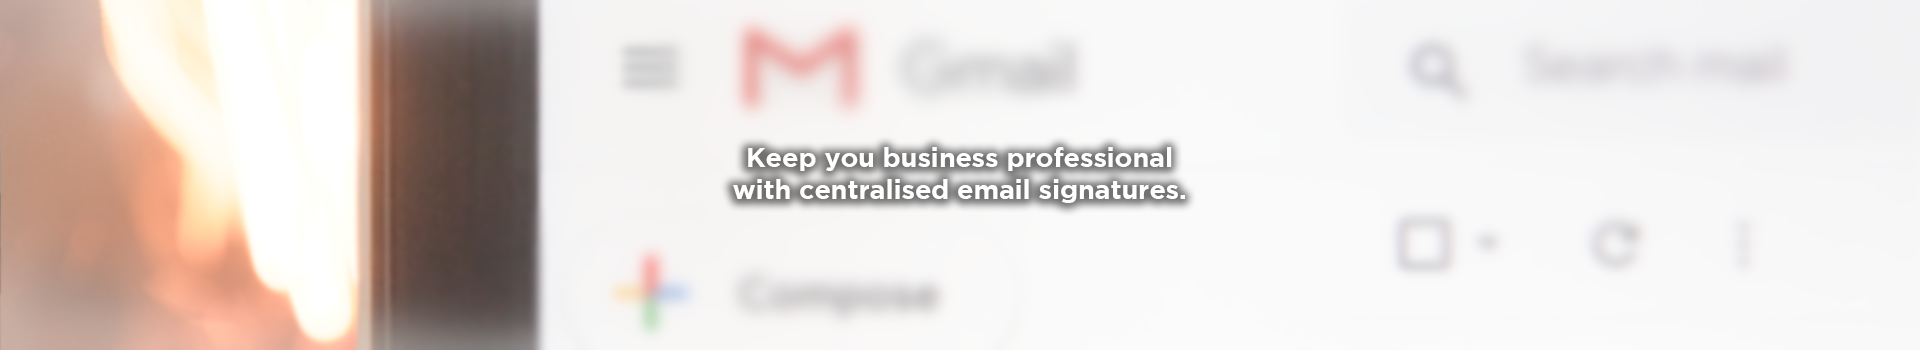 Centralised email signatures banner